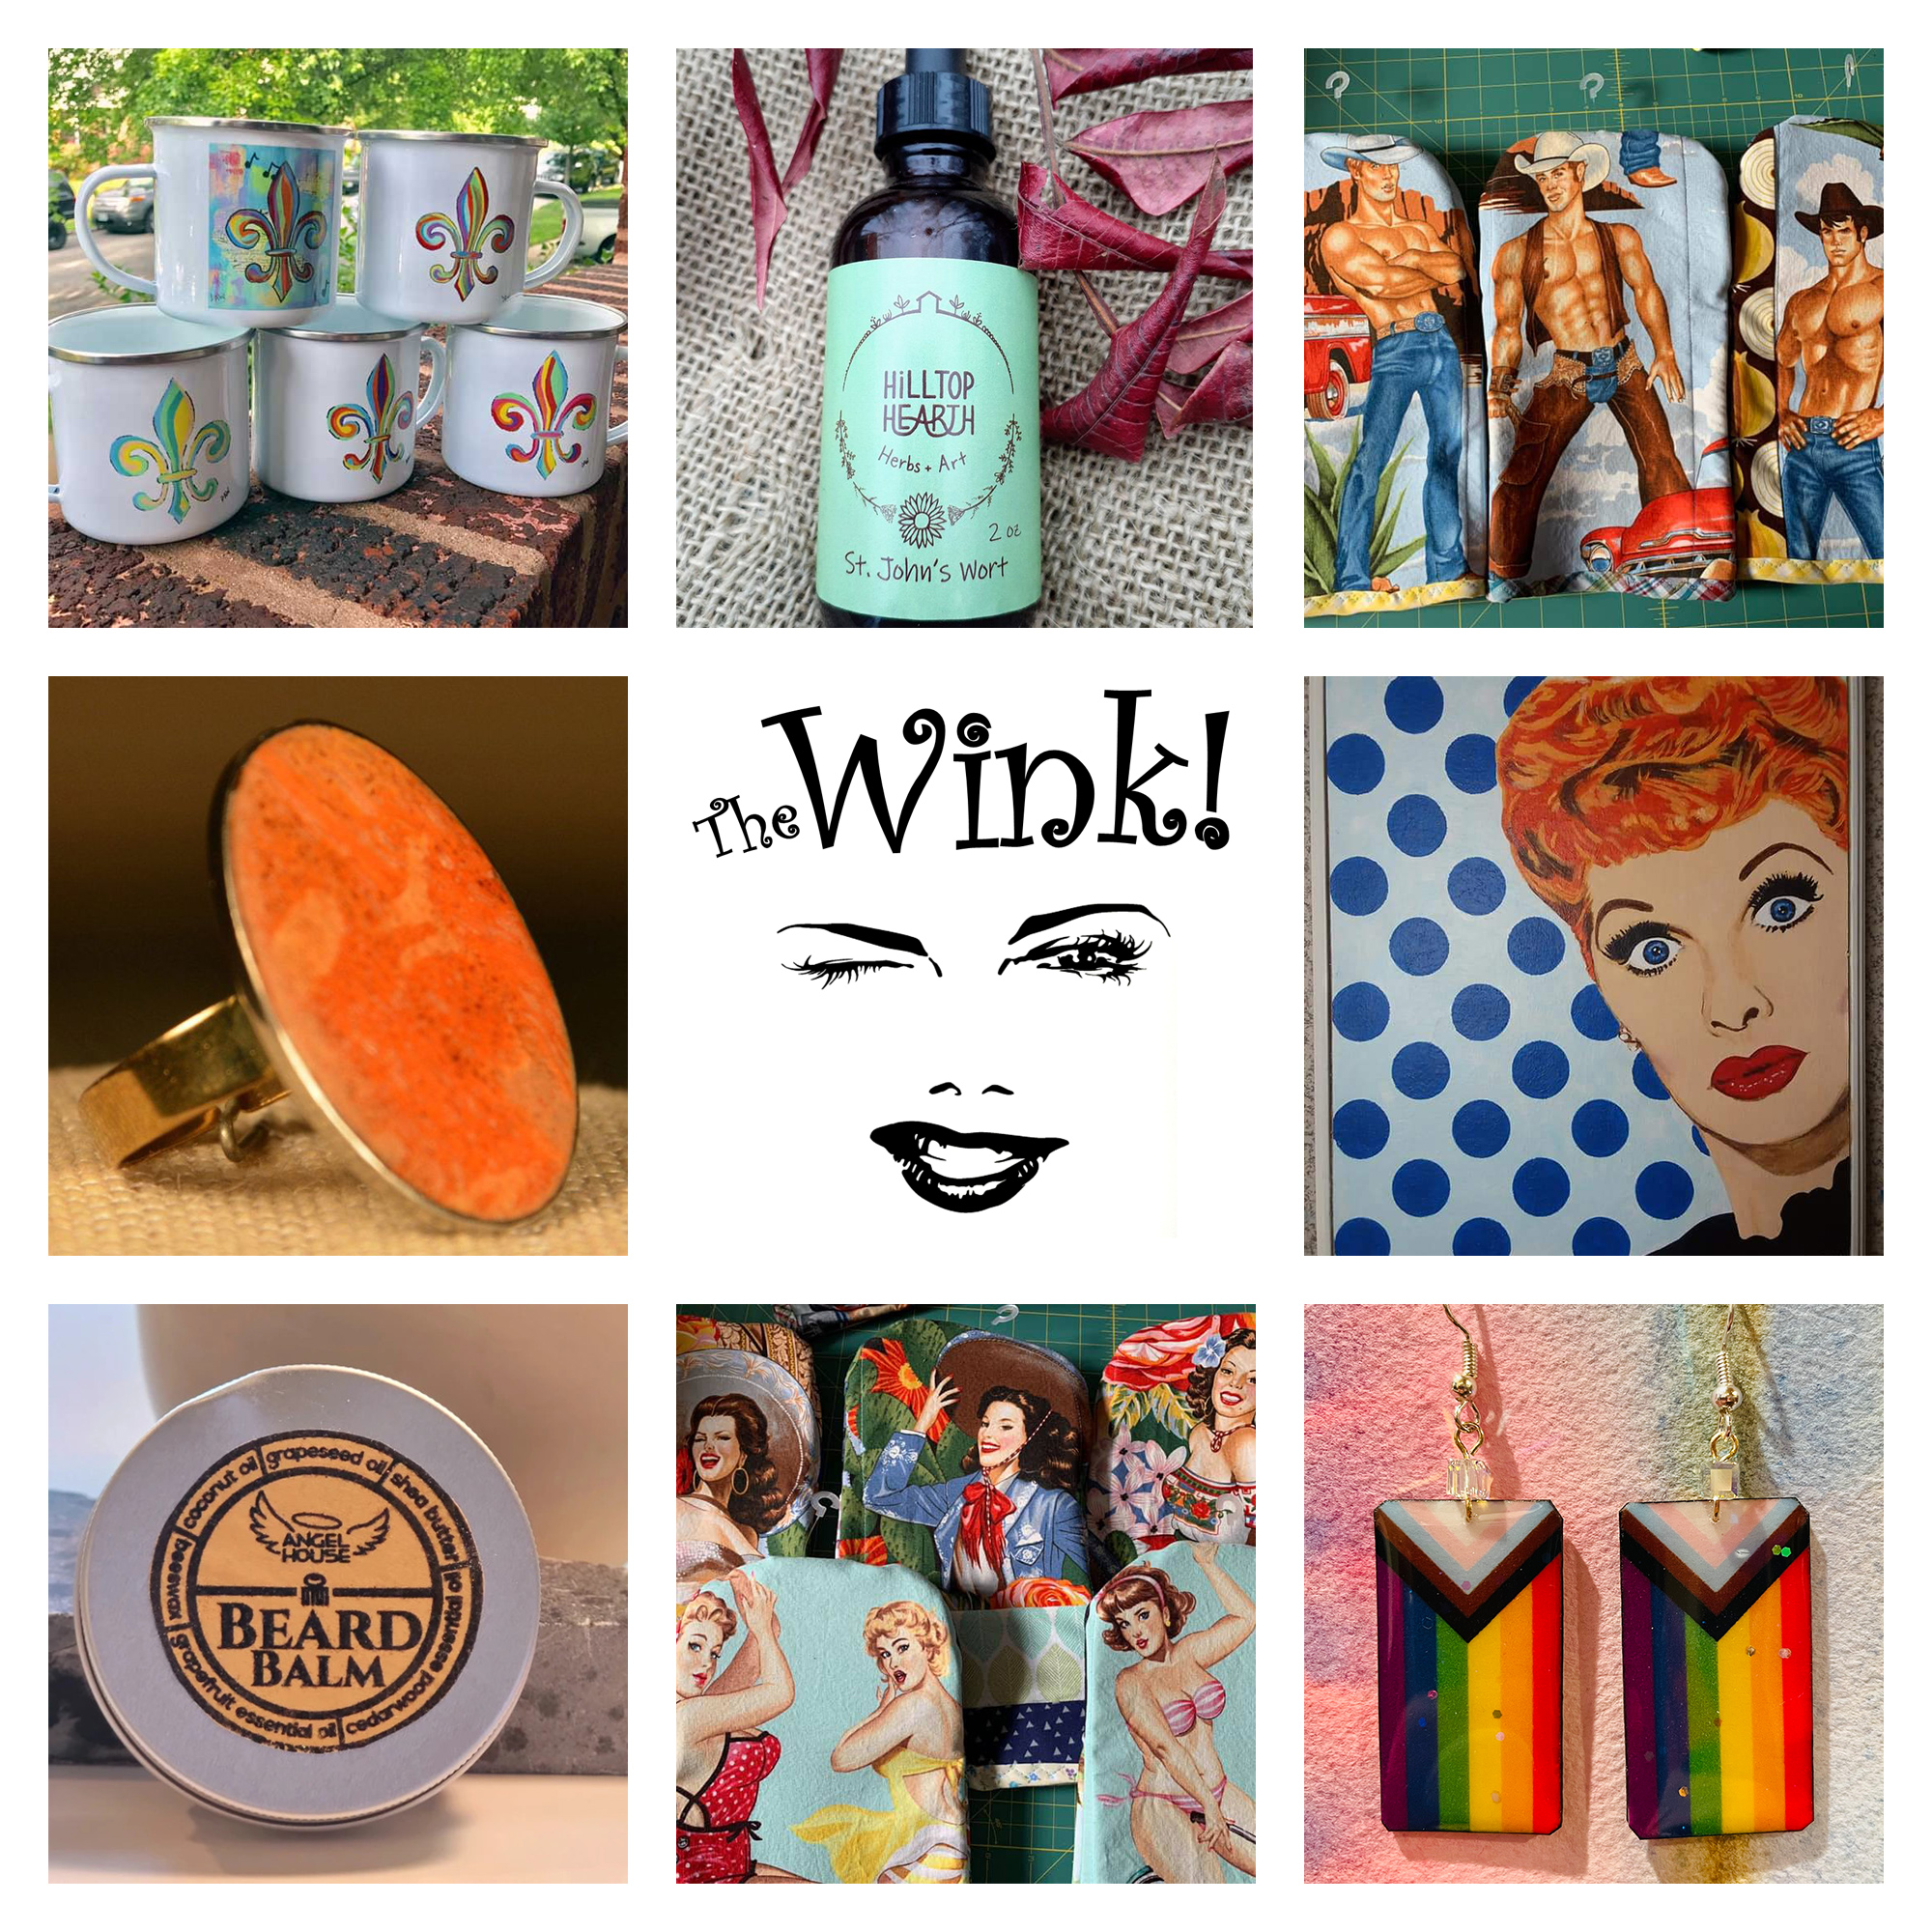 Products available at The Wink! in Downtown Dutchtown, St. Louis, MO. Offerings include jewelry, housewares, beauty products, art, and more.